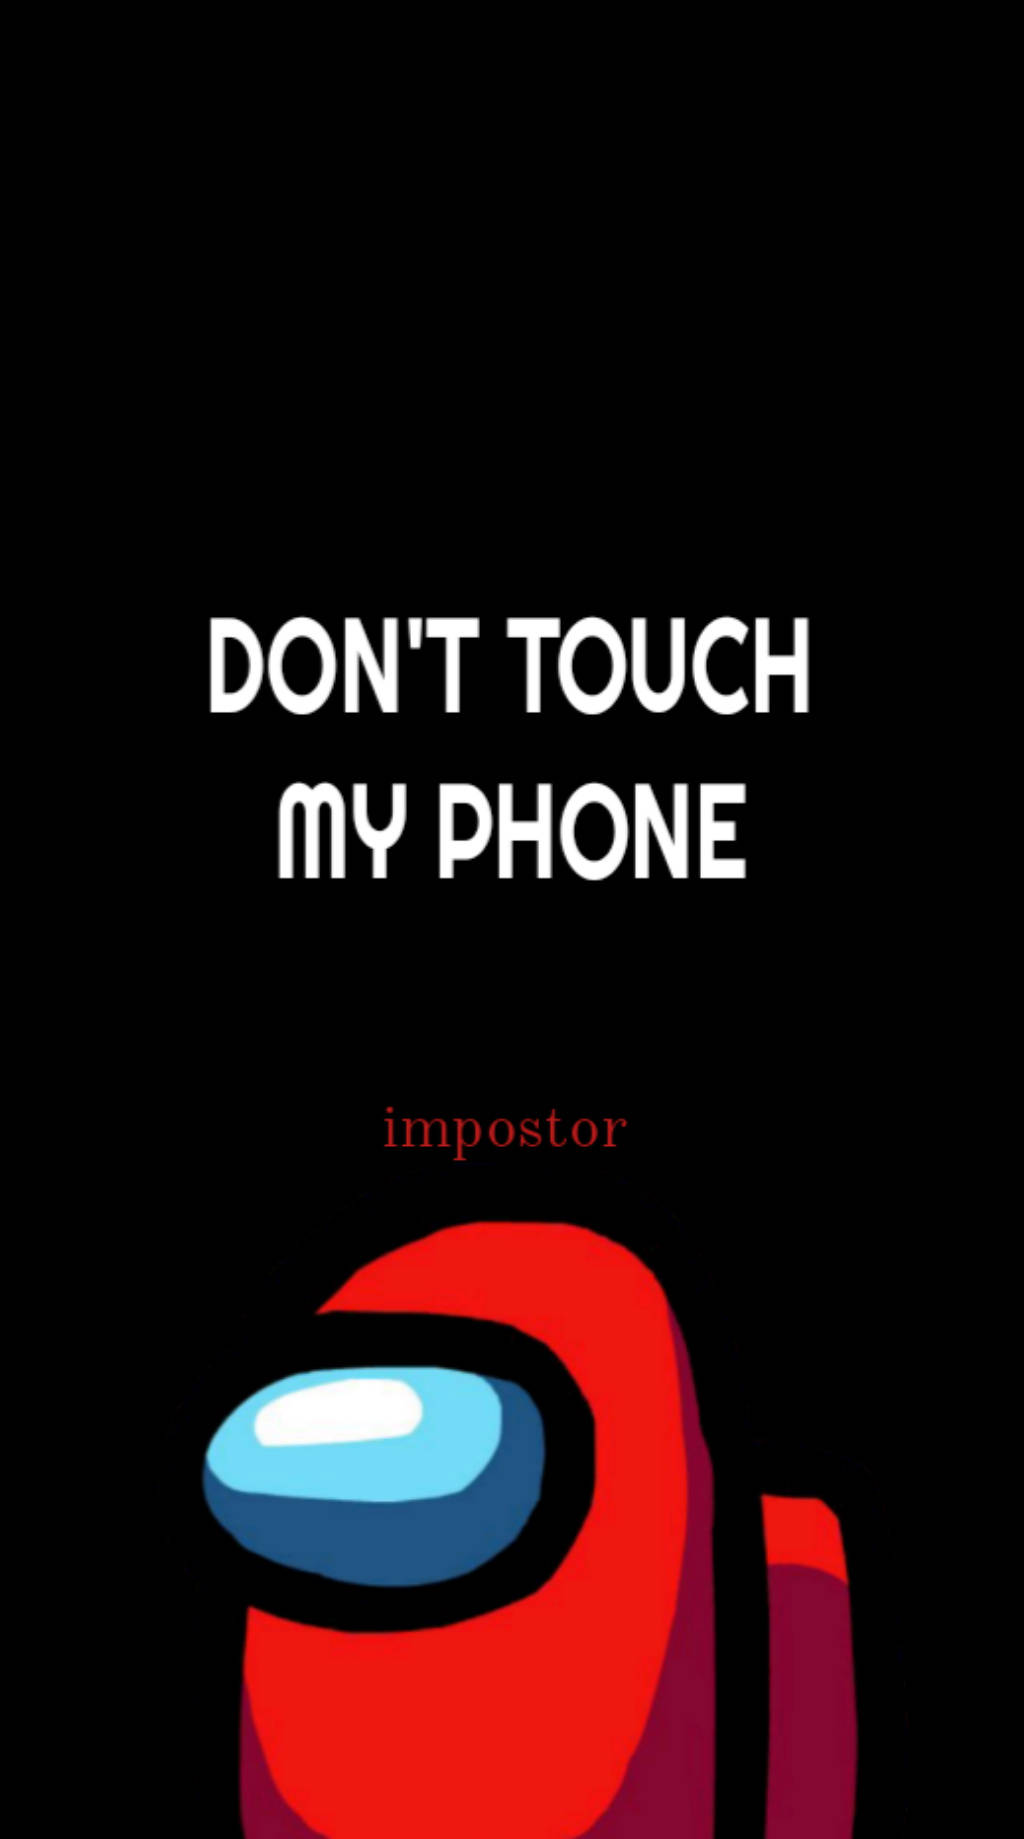 Cool Among Us Don't Touch Phone Background